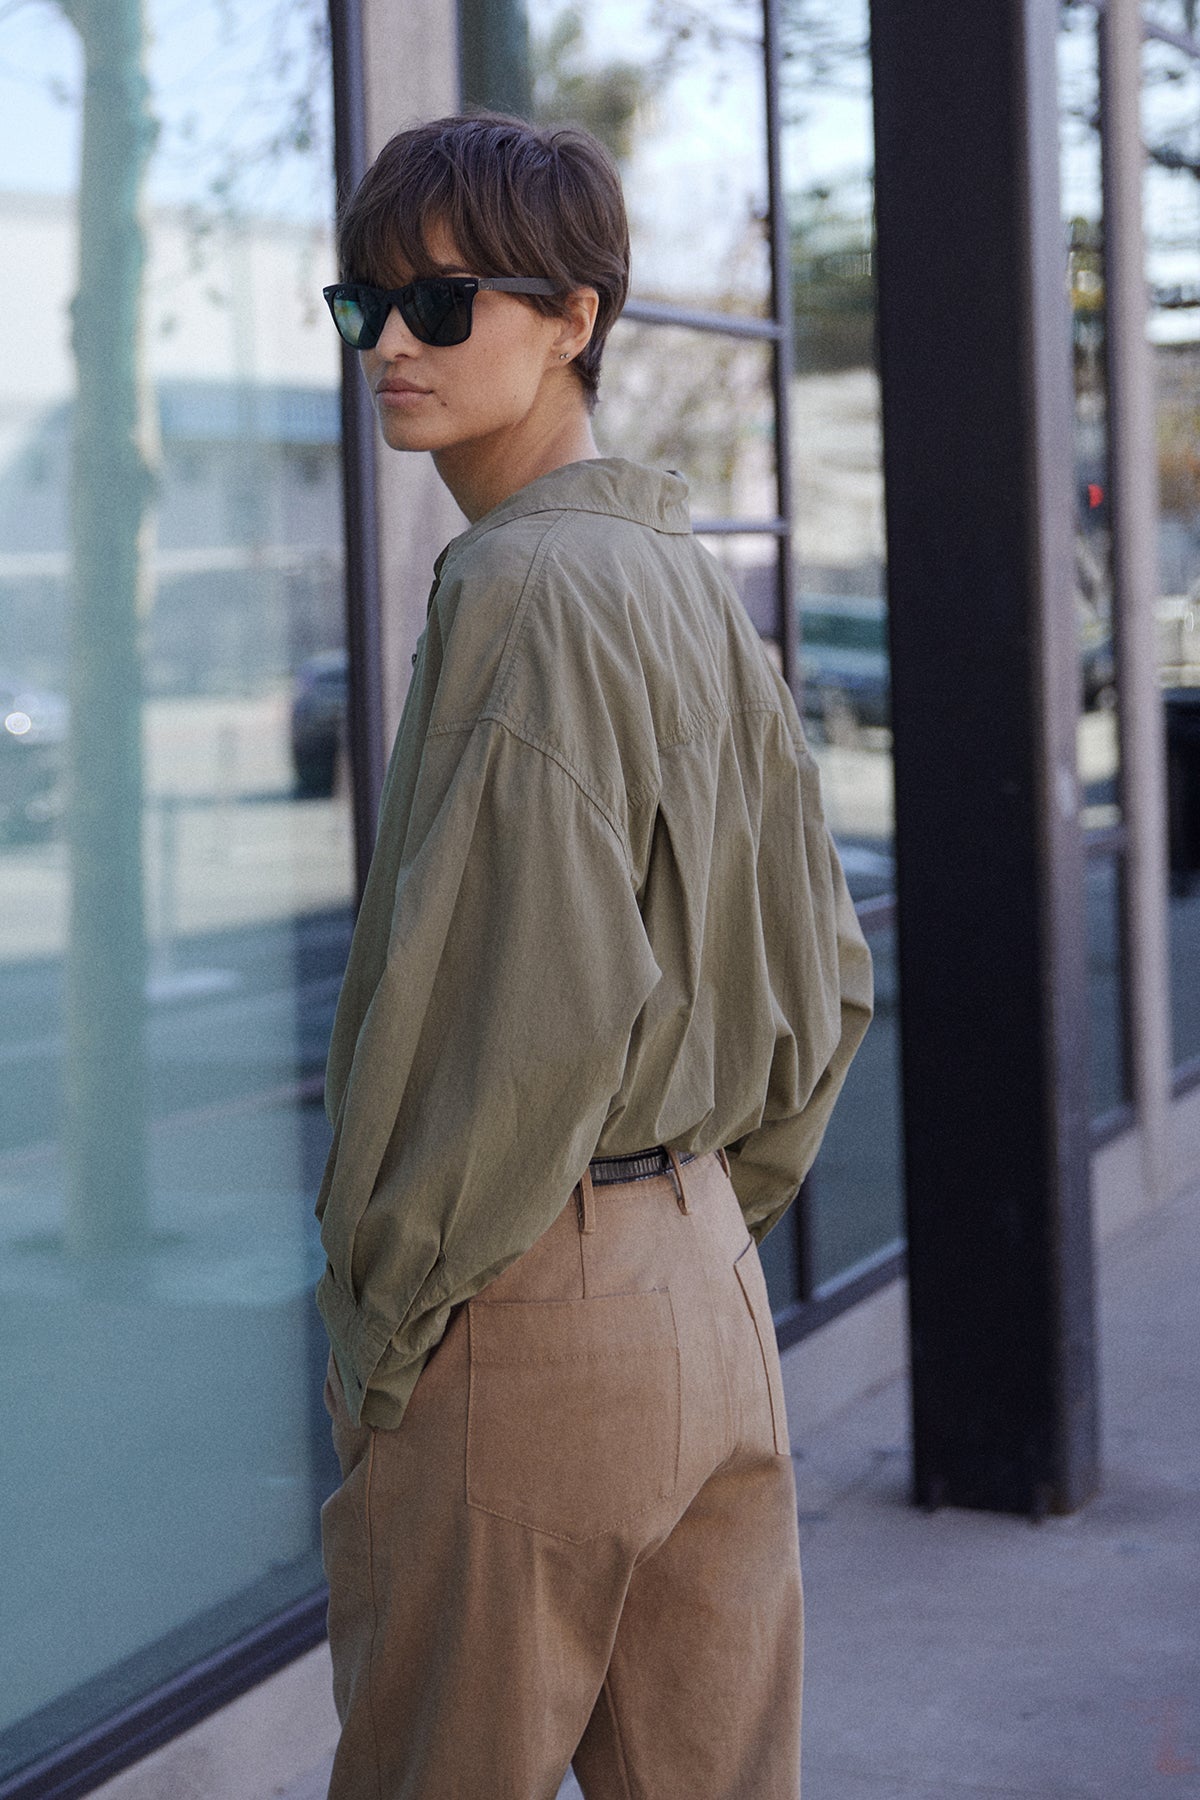 Redondo Shirt in thicket with Ventura Pant side & back, model wearing sunglasses looking over left shoulder.-25870844166337